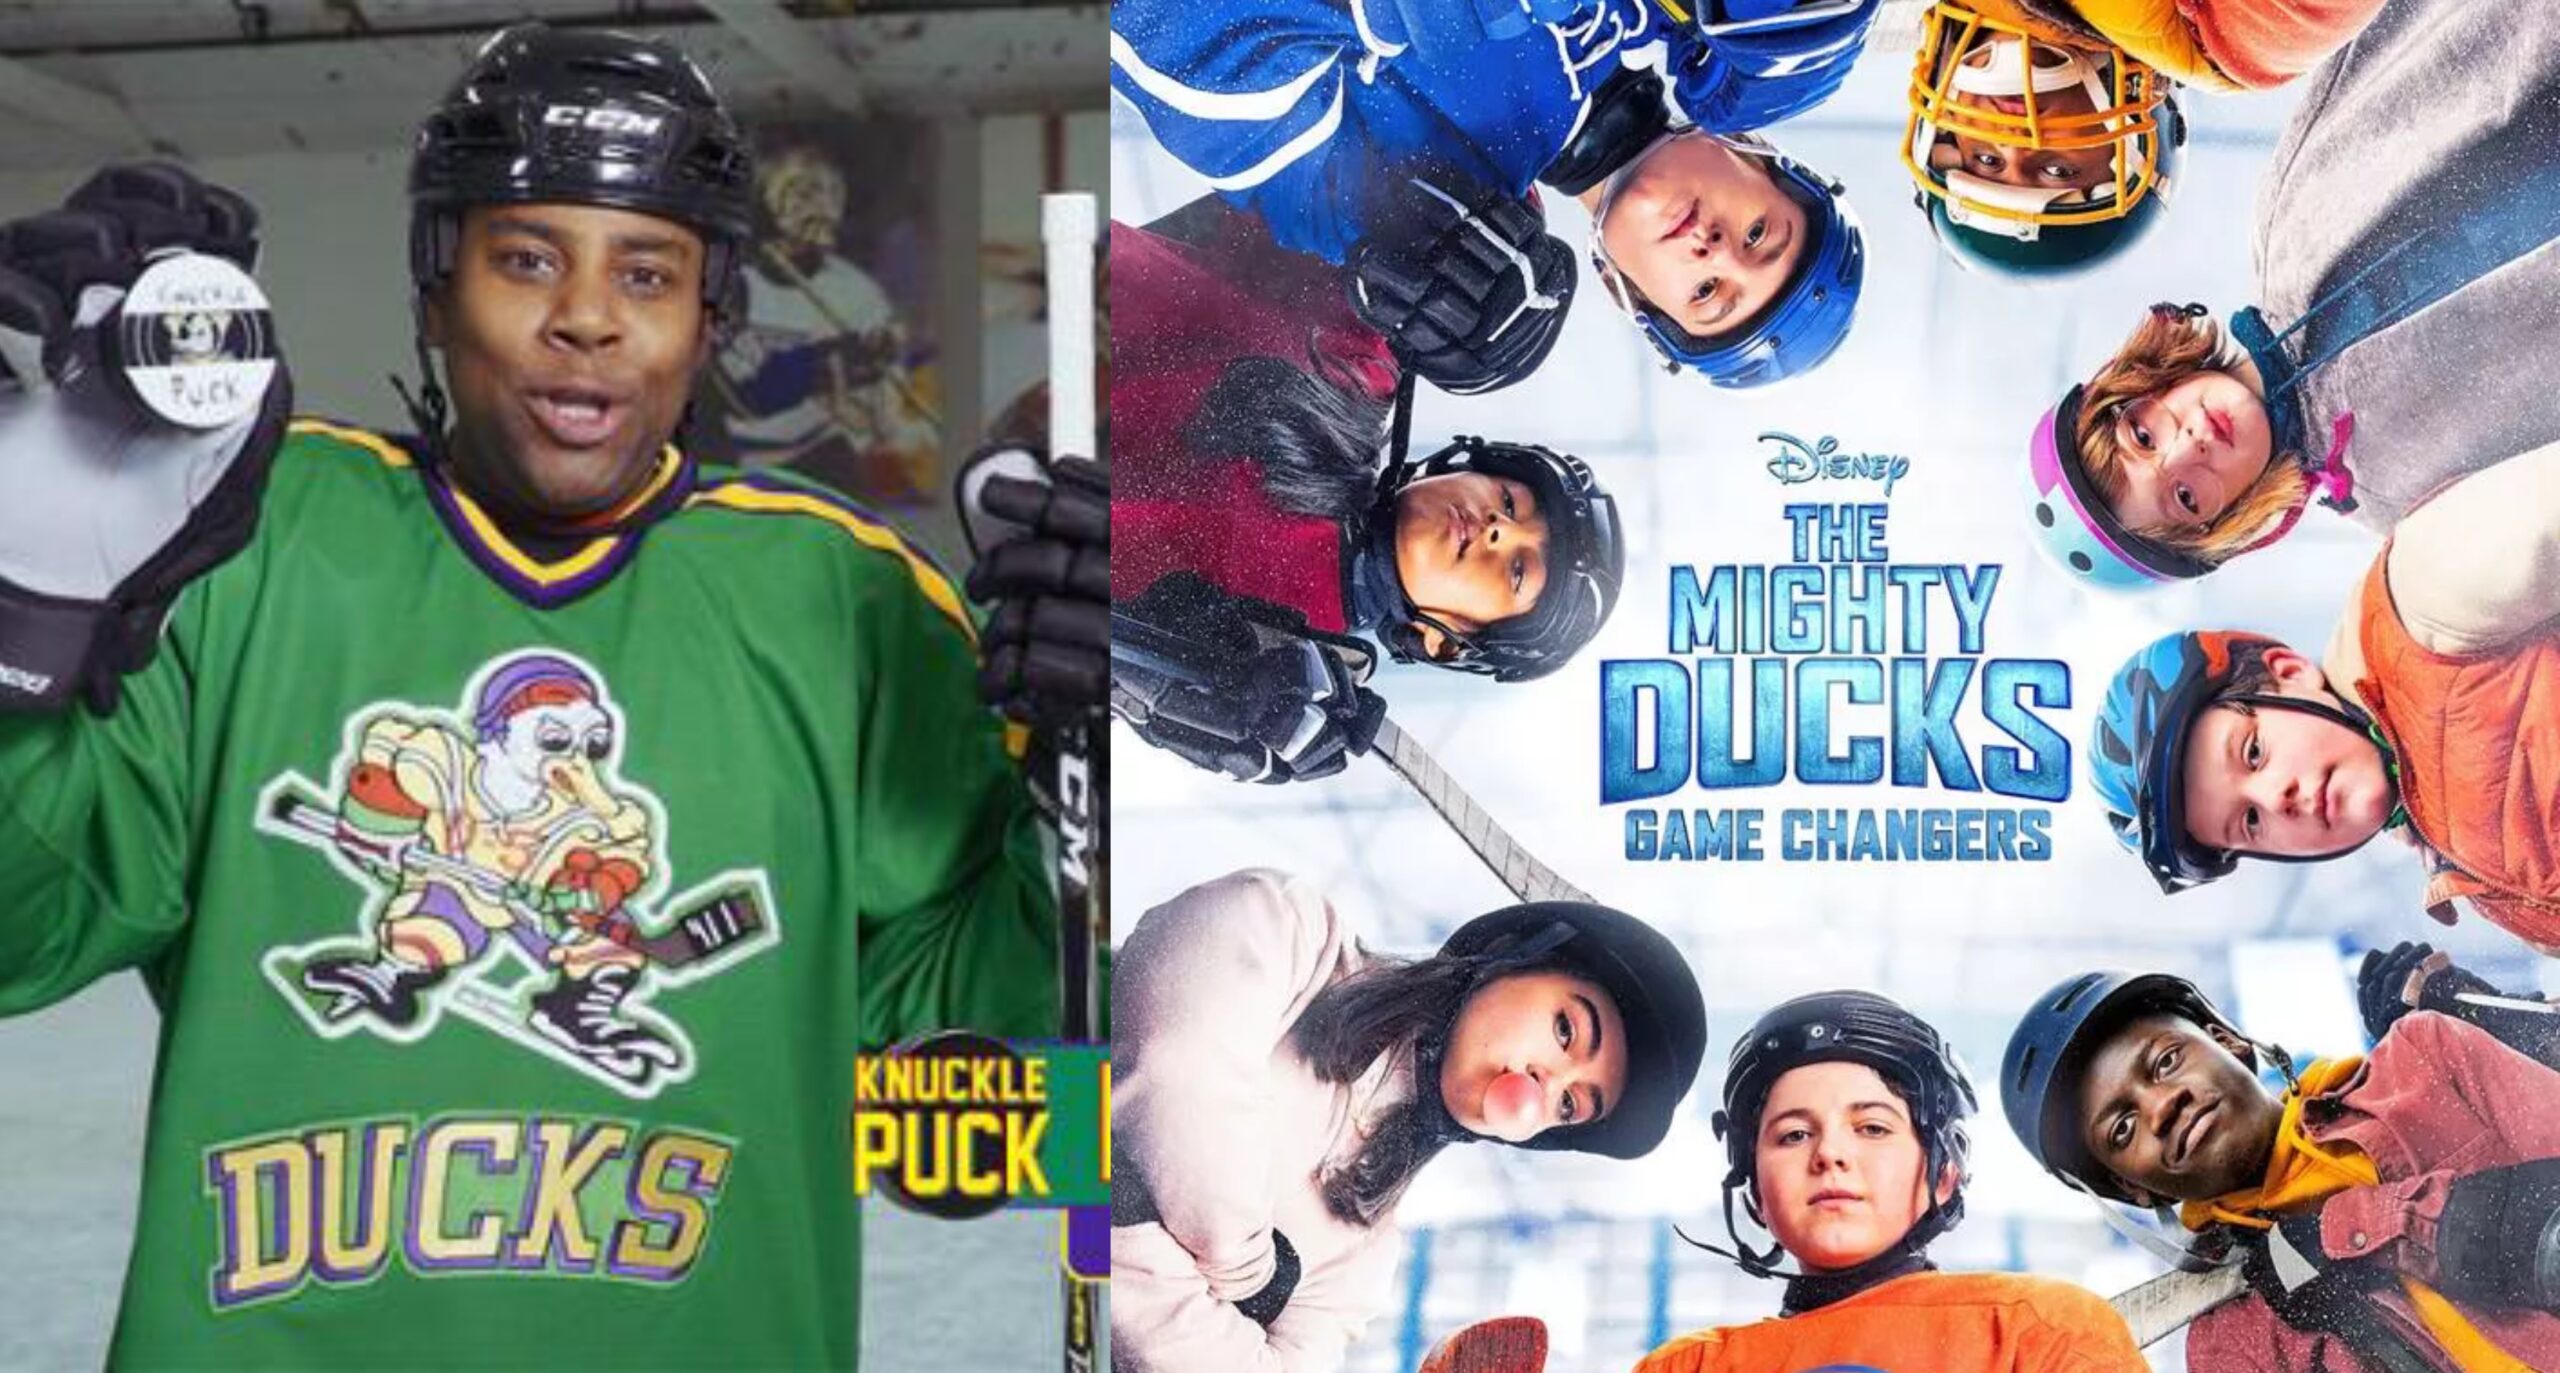 The Mighty Ducks Game Changers Brady Noon Ice Hockey Jersey